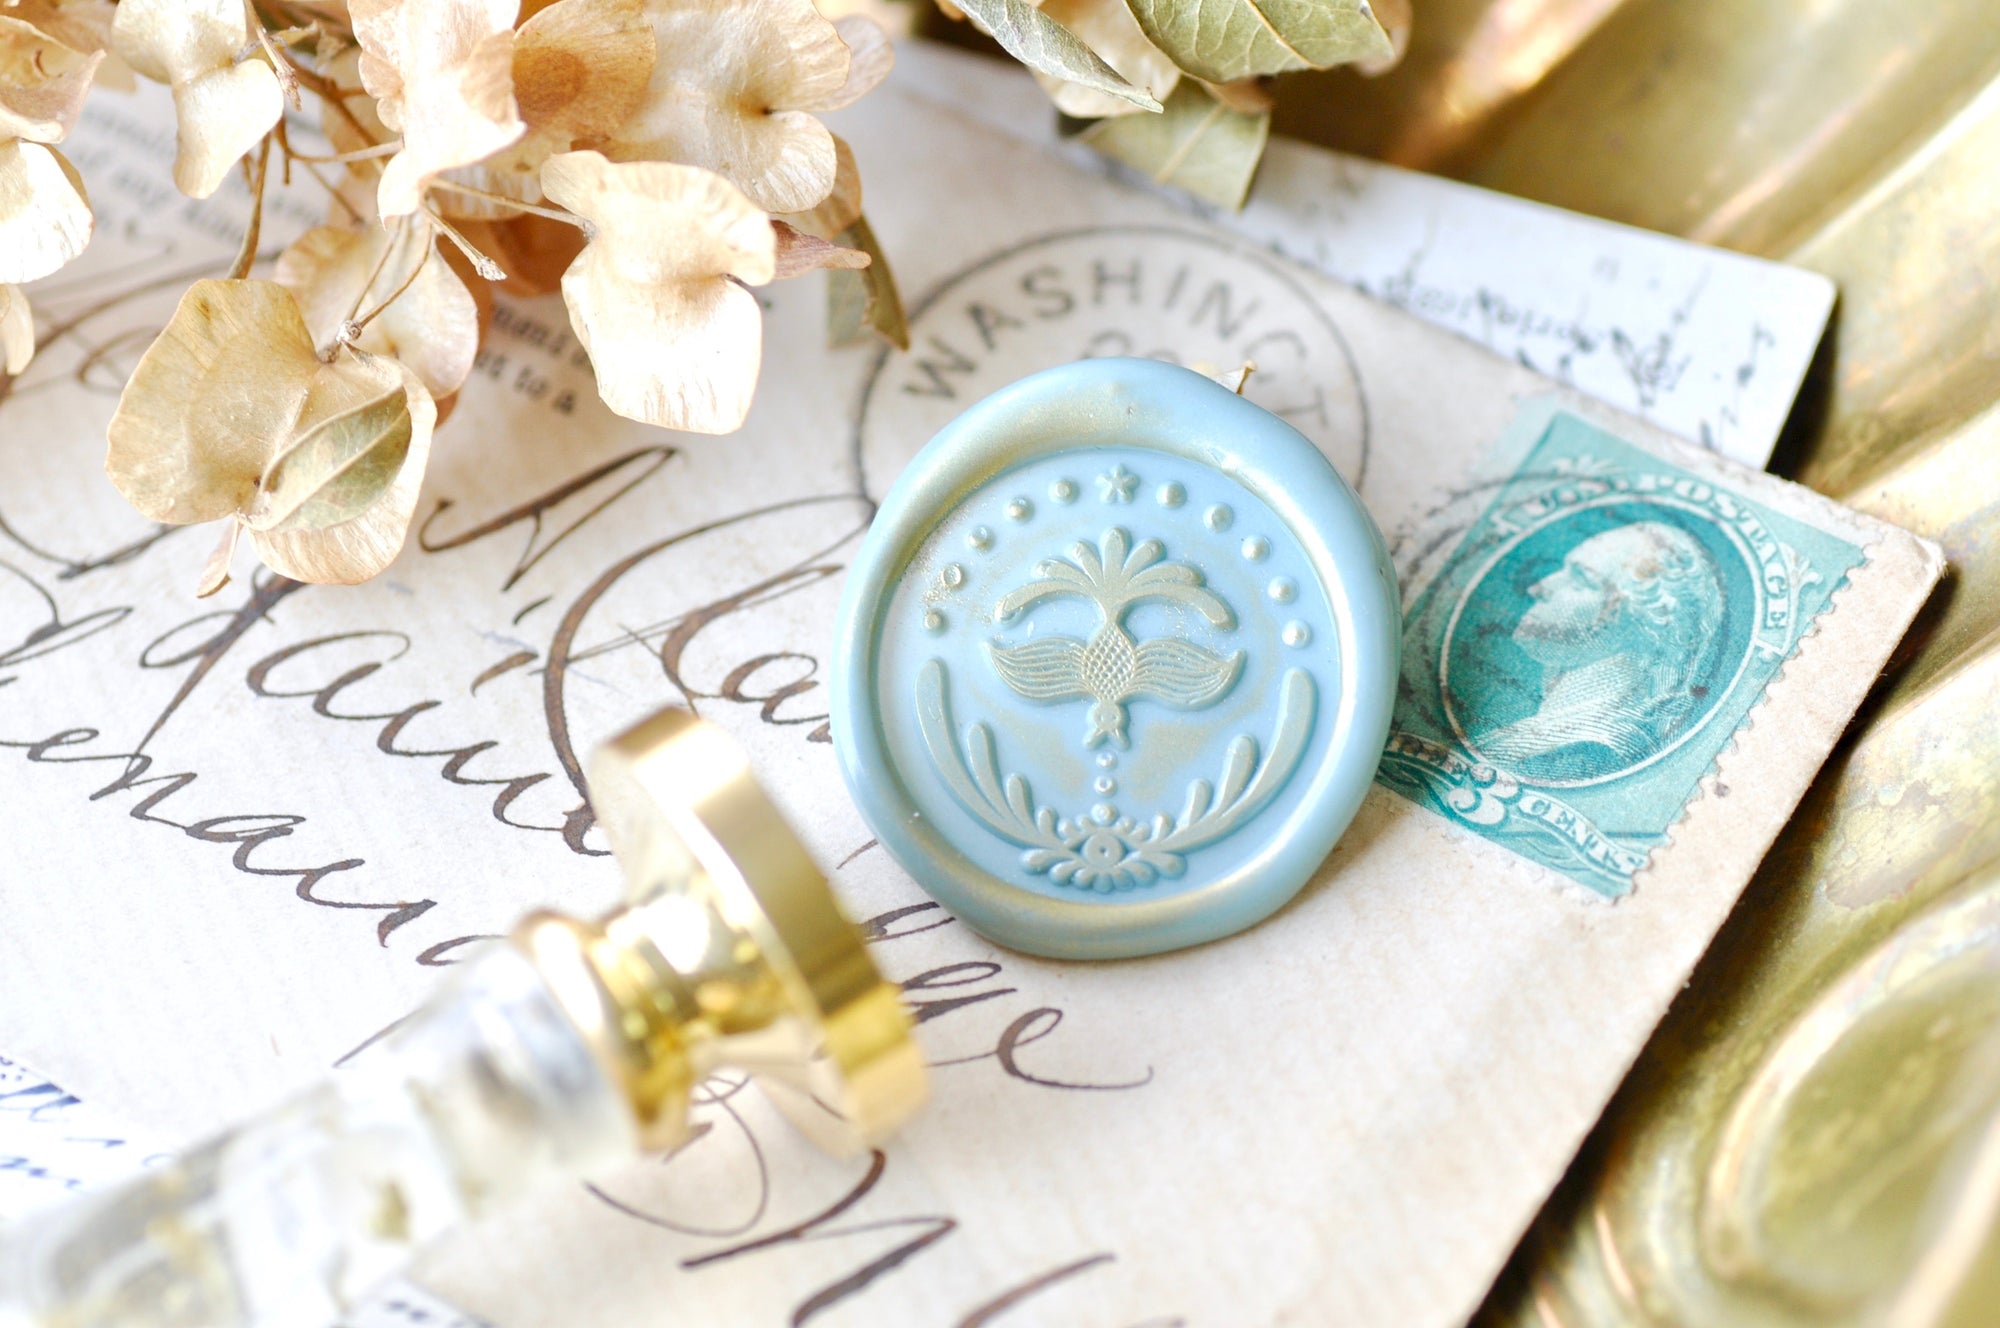 Mystic Vision Wax Seal Stamp Designed by Orla Bird